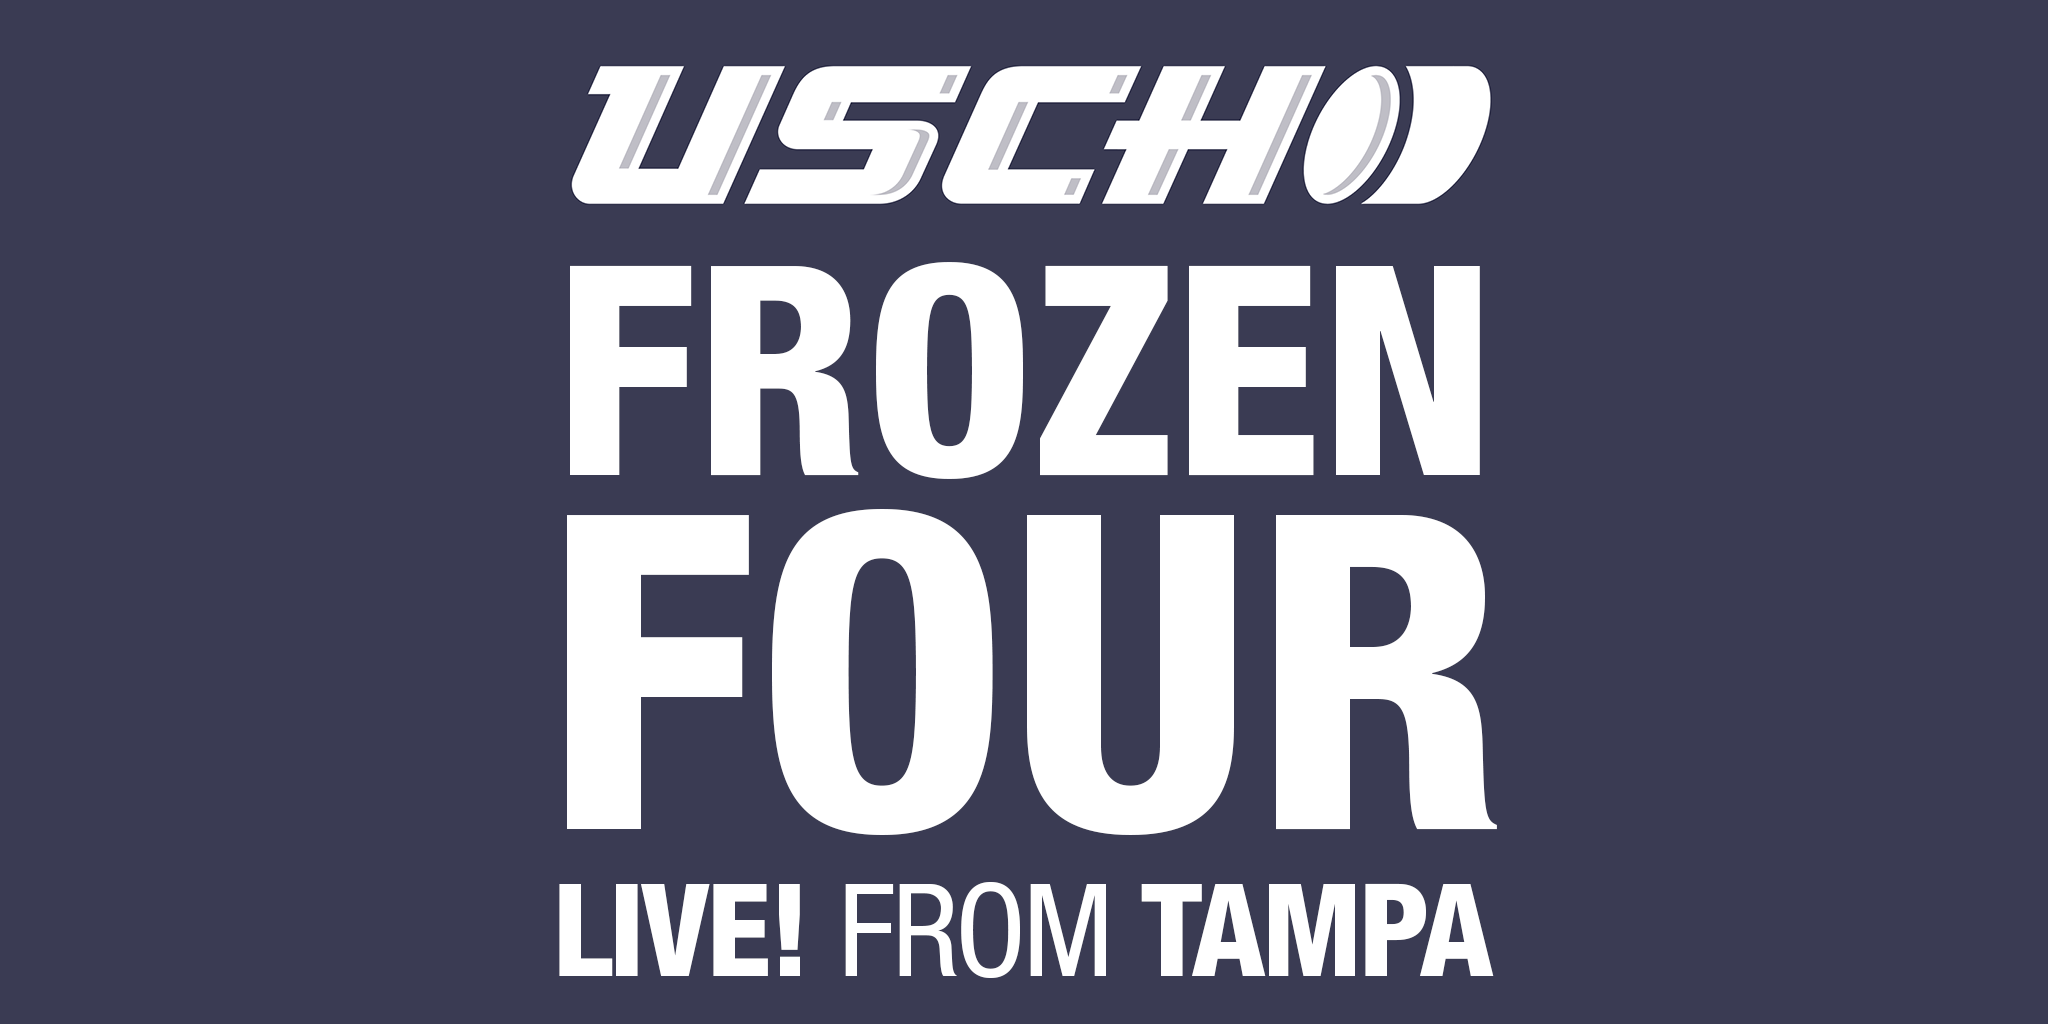 Live from Tampa USCHO Frozen Four Live! podcast covers the 2023 NCAA Mens Frozen Four